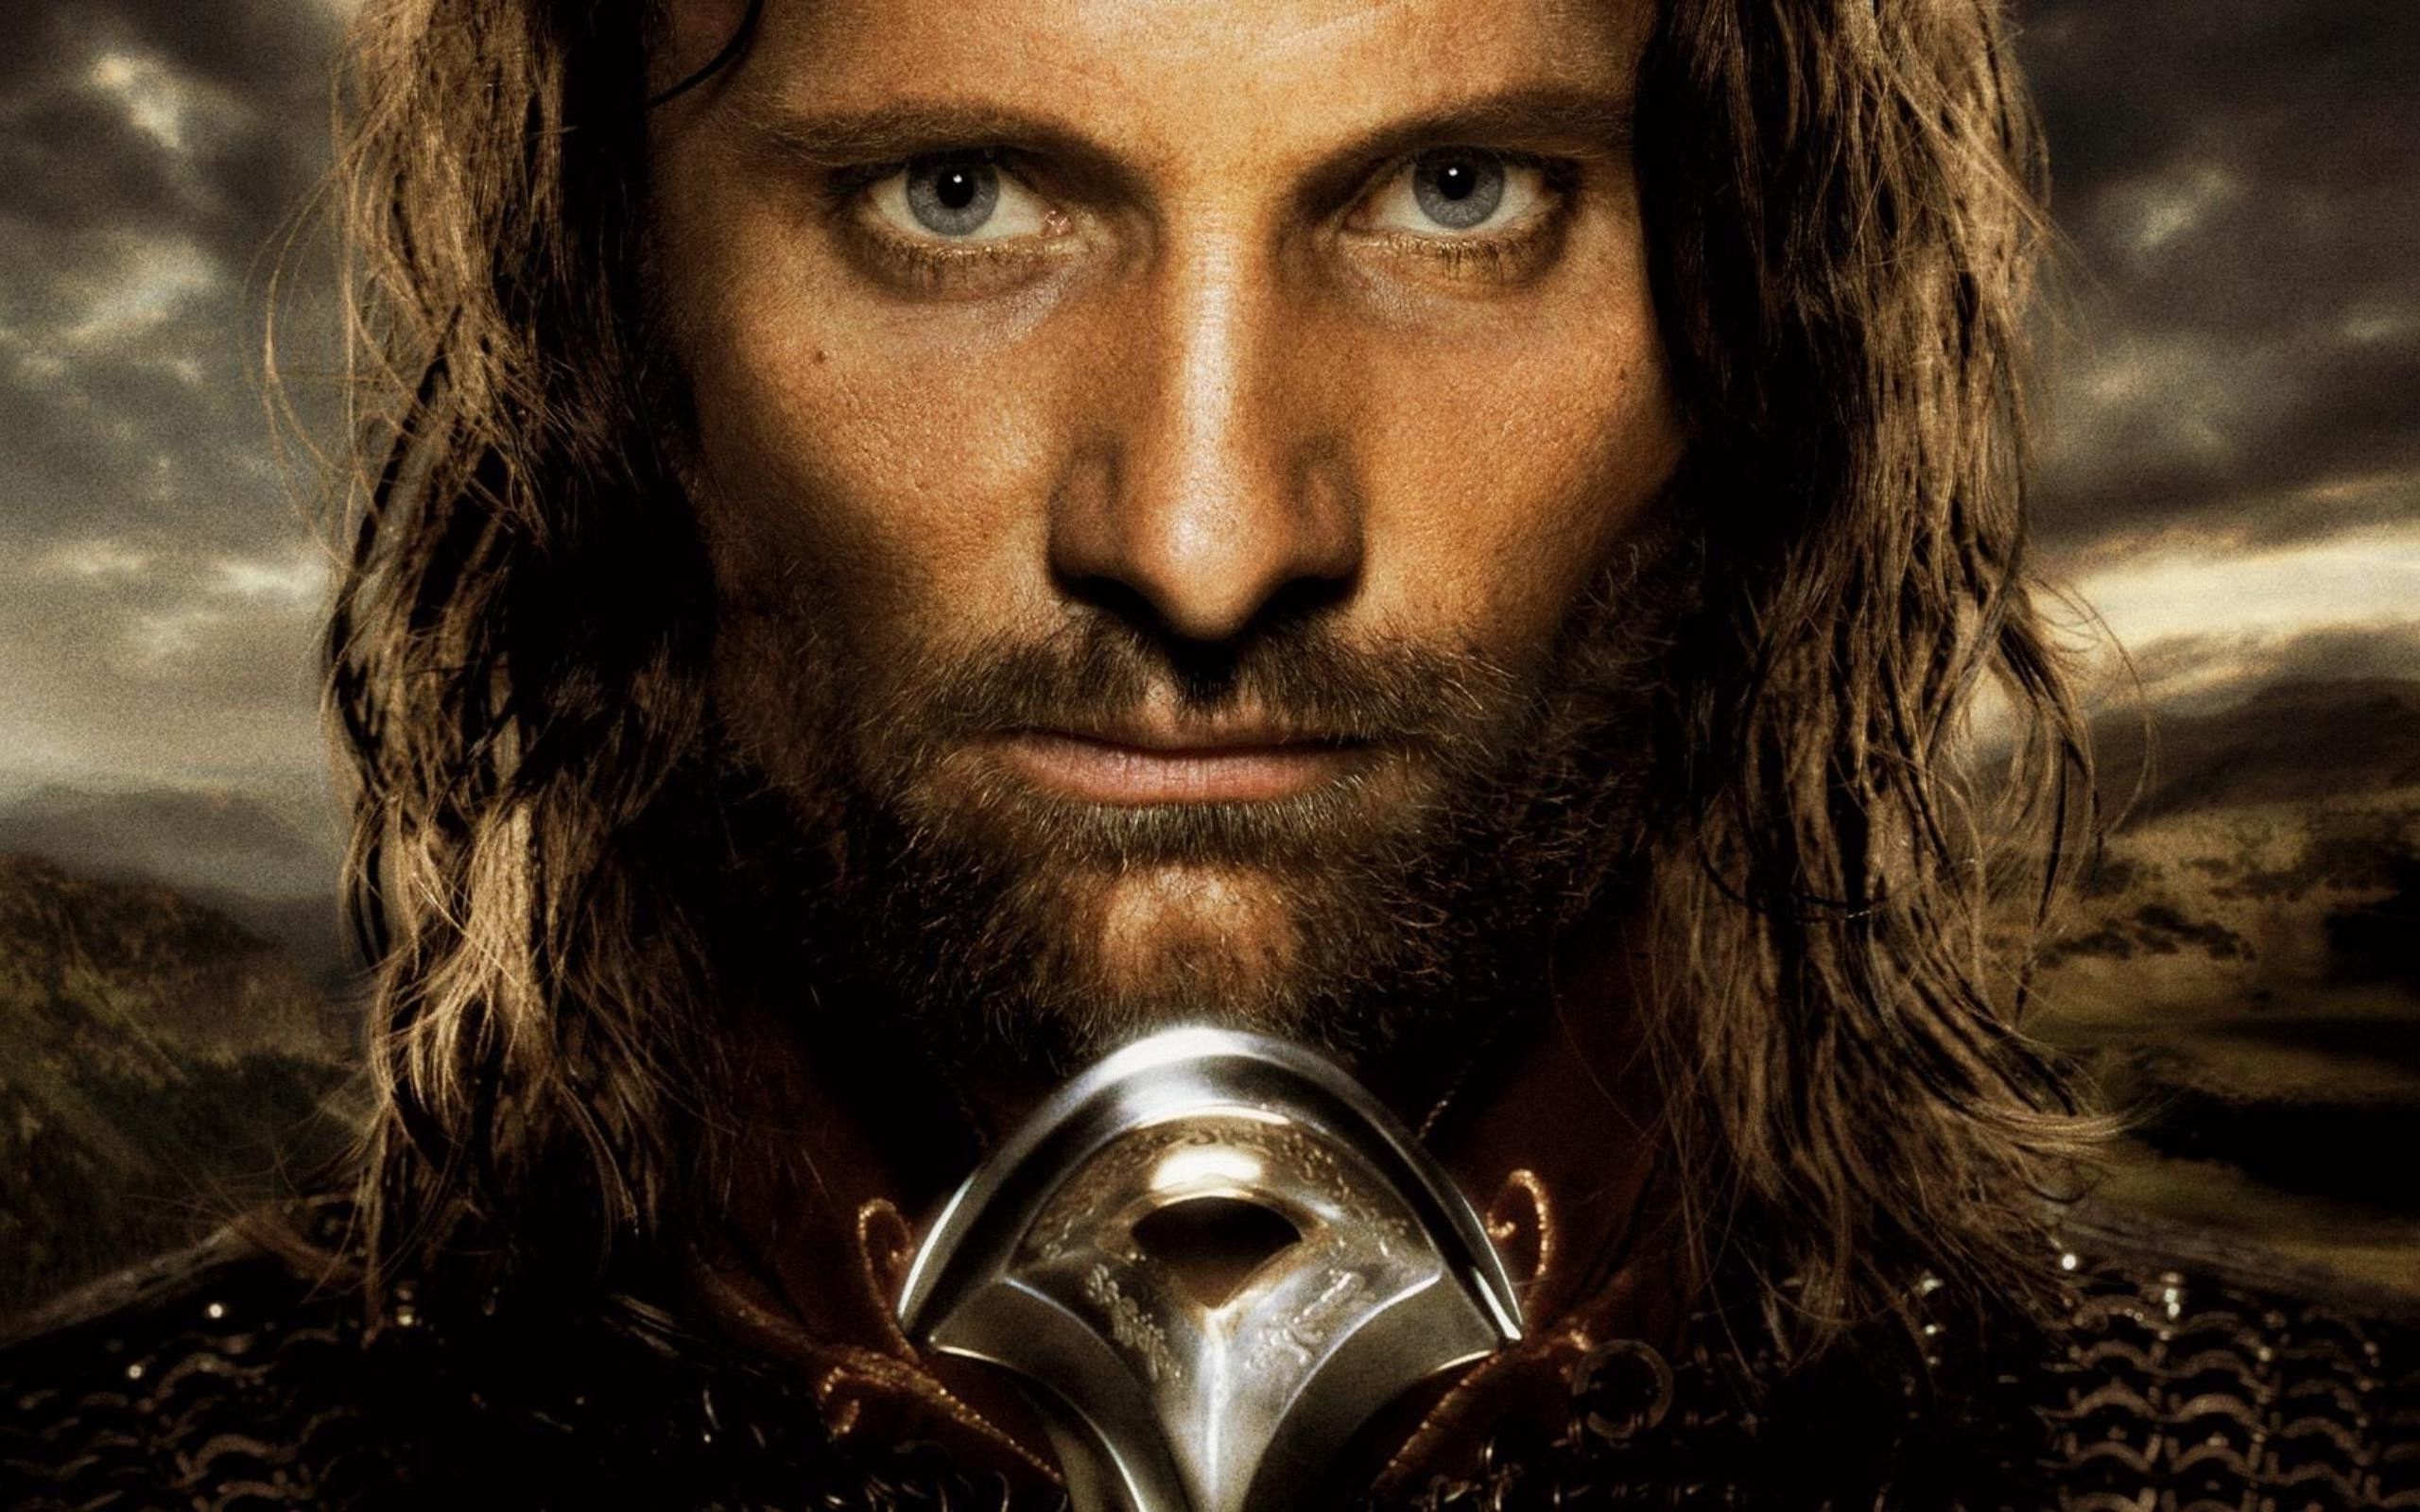 Aragorn wallpapers, Heroic warrior, Middle-earth backgrounds, Free download, 2560x1600 HD Desktop